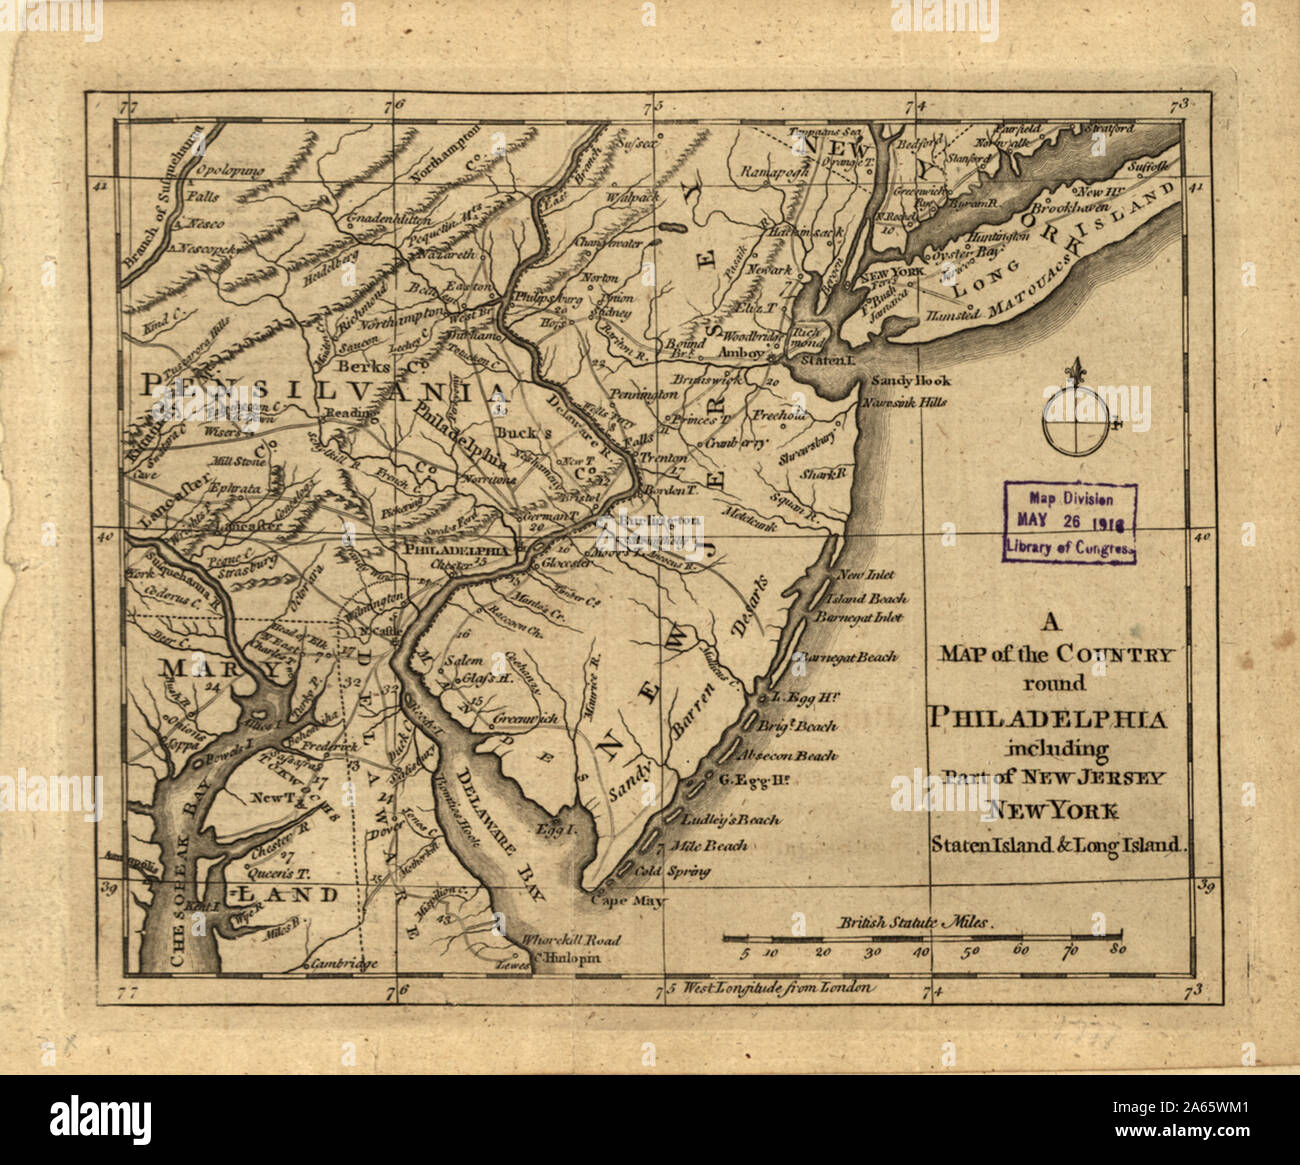 A Map of the Country round Philadelphia Including Part of New Jersey and New York, 1776 Stock Photo